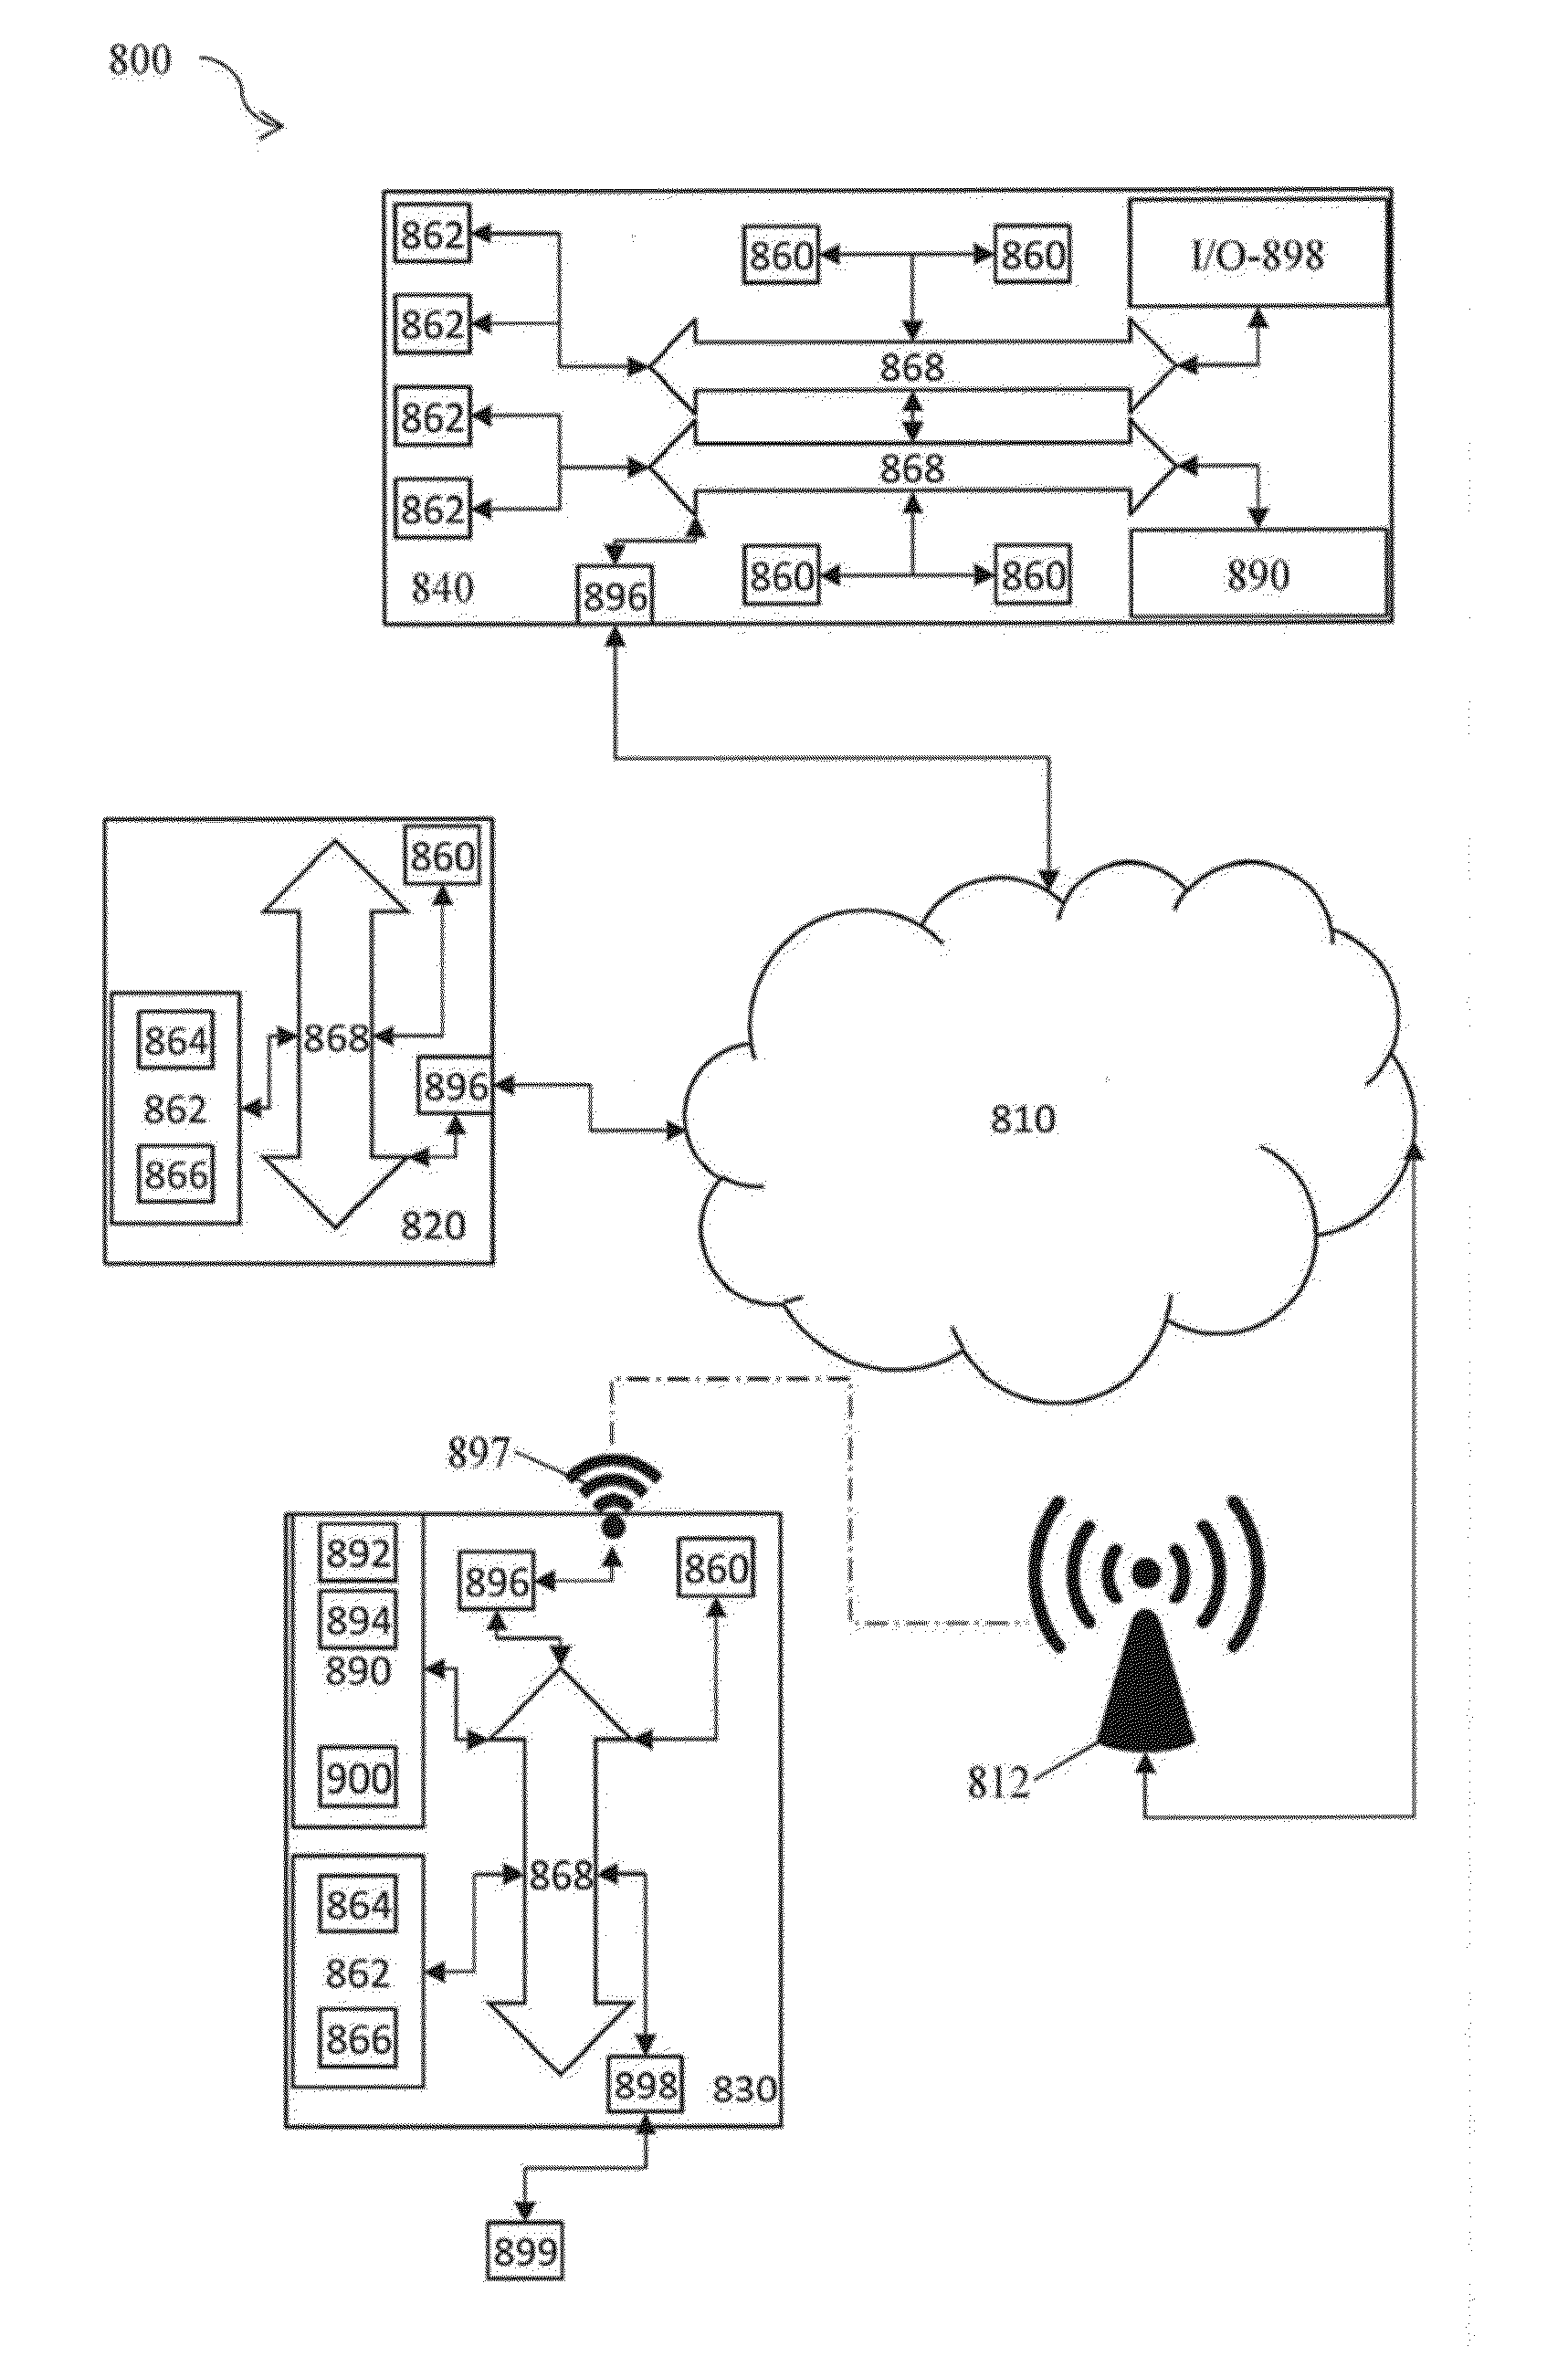 Systems and methods for advanced energy settlements, network-based messaging, and software applications for electric power grids, microgrids, grid elements, and/or electric power networks